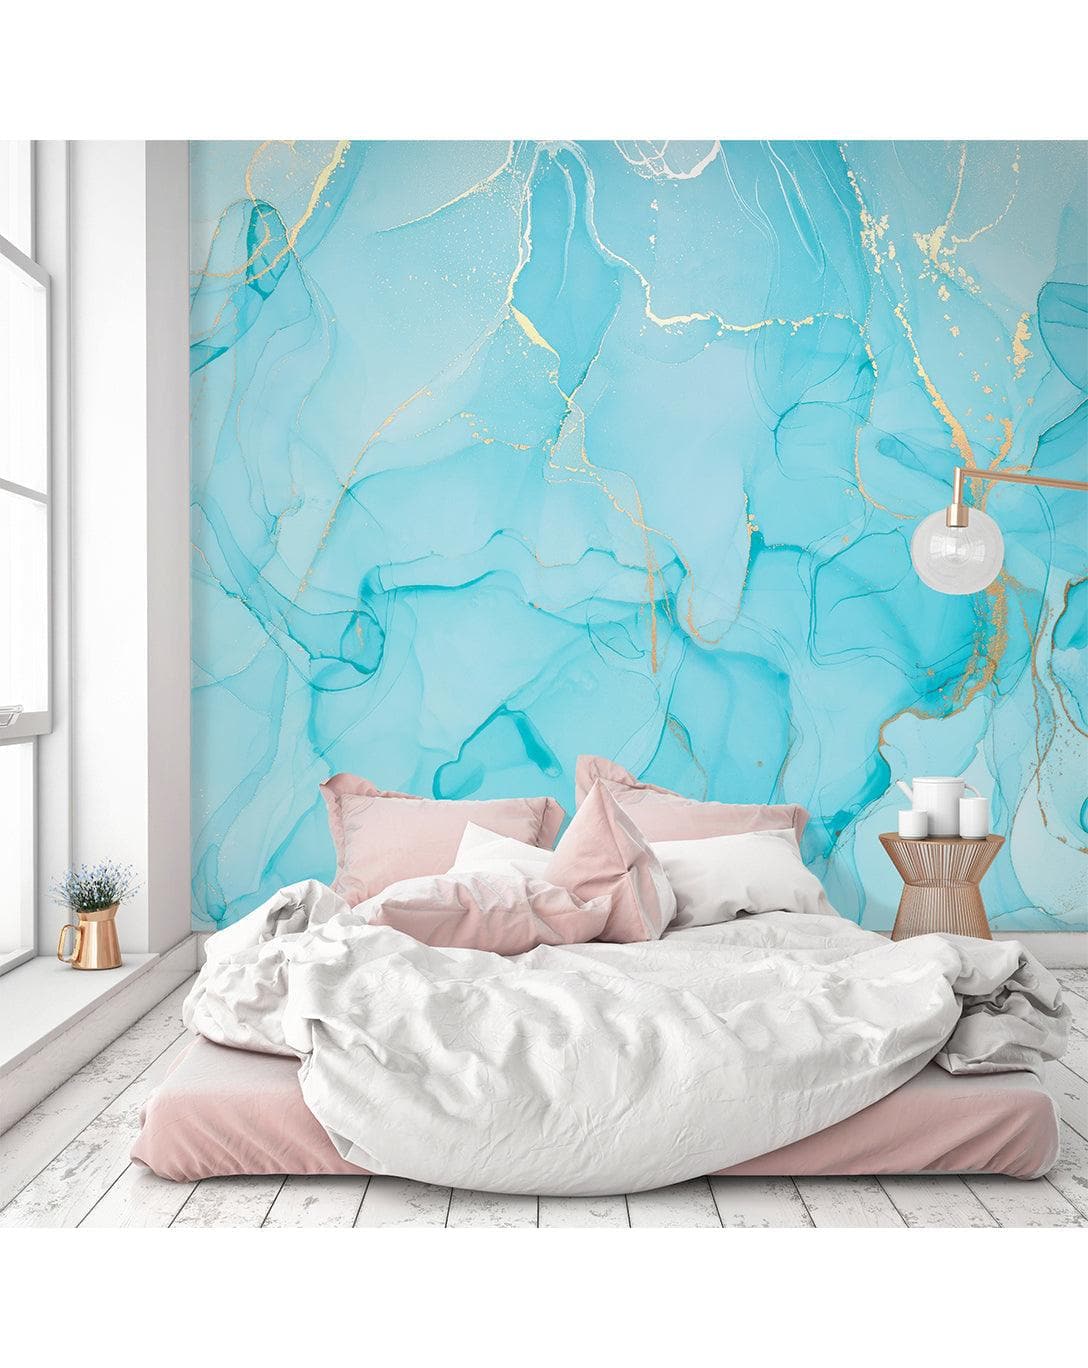 Blue Watercolor Abstract Alcohol Ink Marble Wall Mural Dcal Blue Watercolor Abstract Alcohol Ink Marble Wall Mural Dcal 